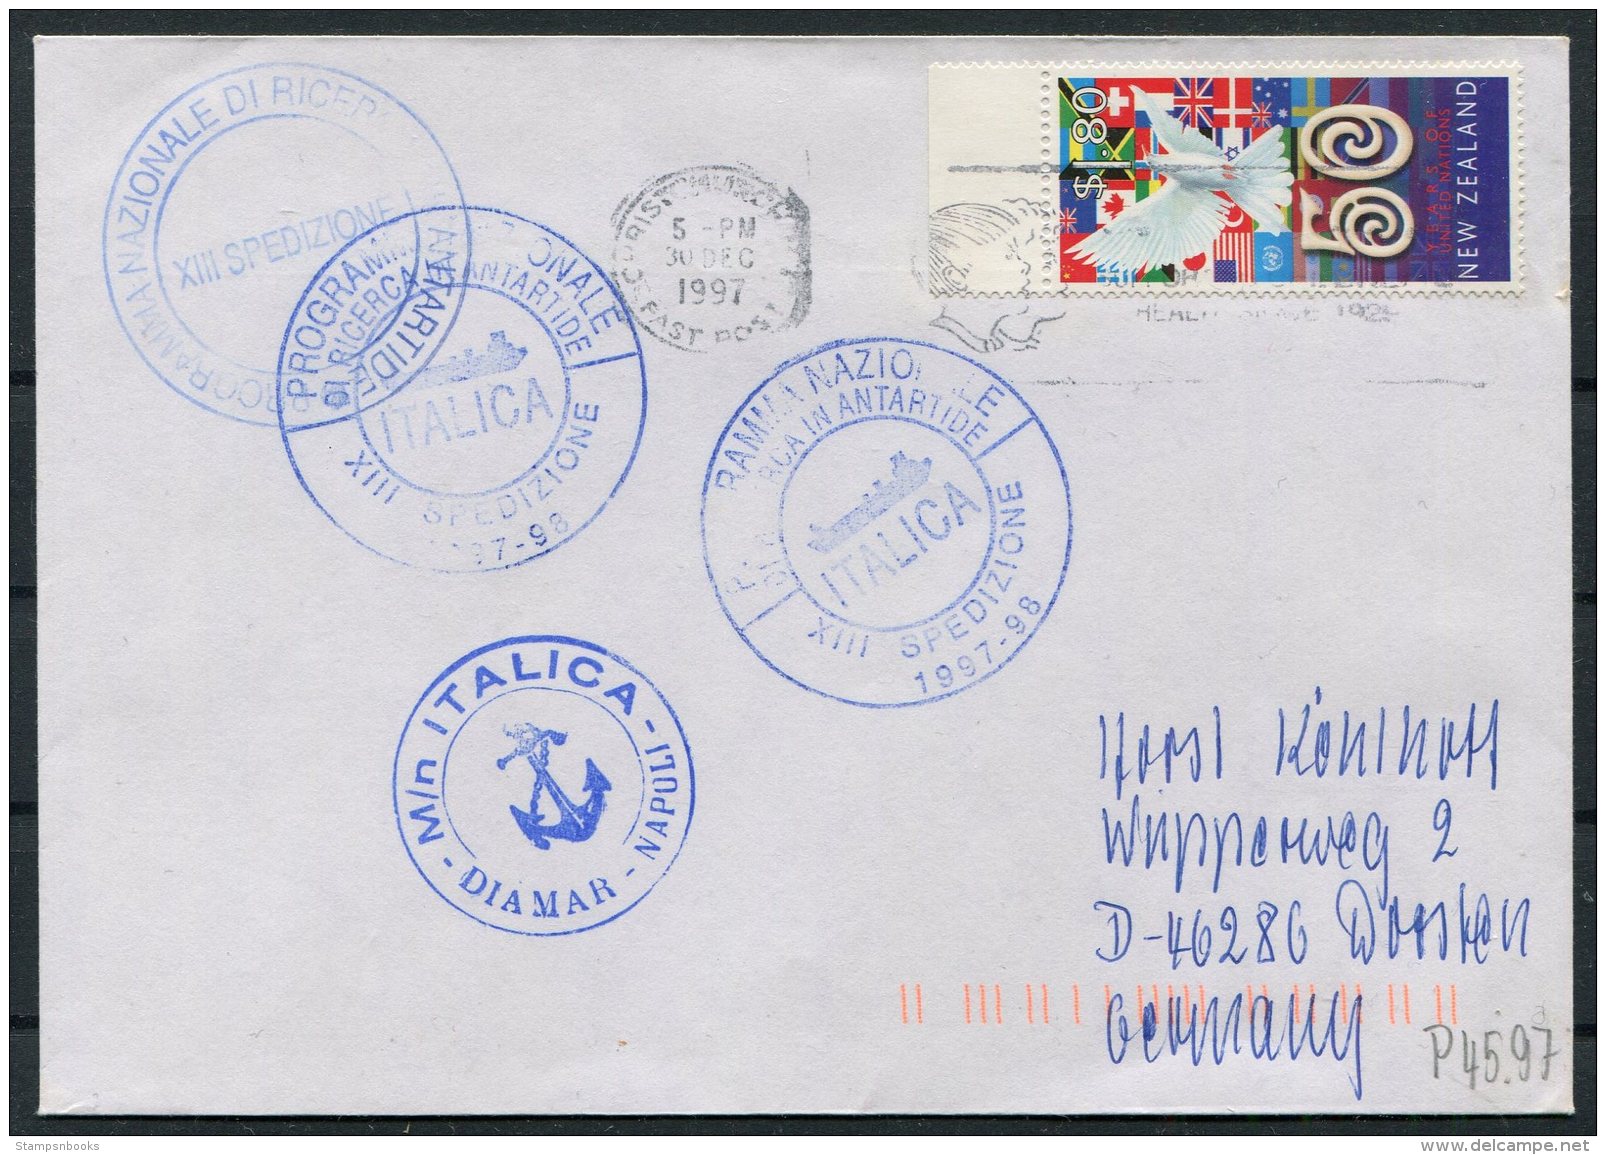 1991 New Zealand, Christchurch Italy Antarctic, ITALICA Ship, Napoli Cover - Covers & Documents